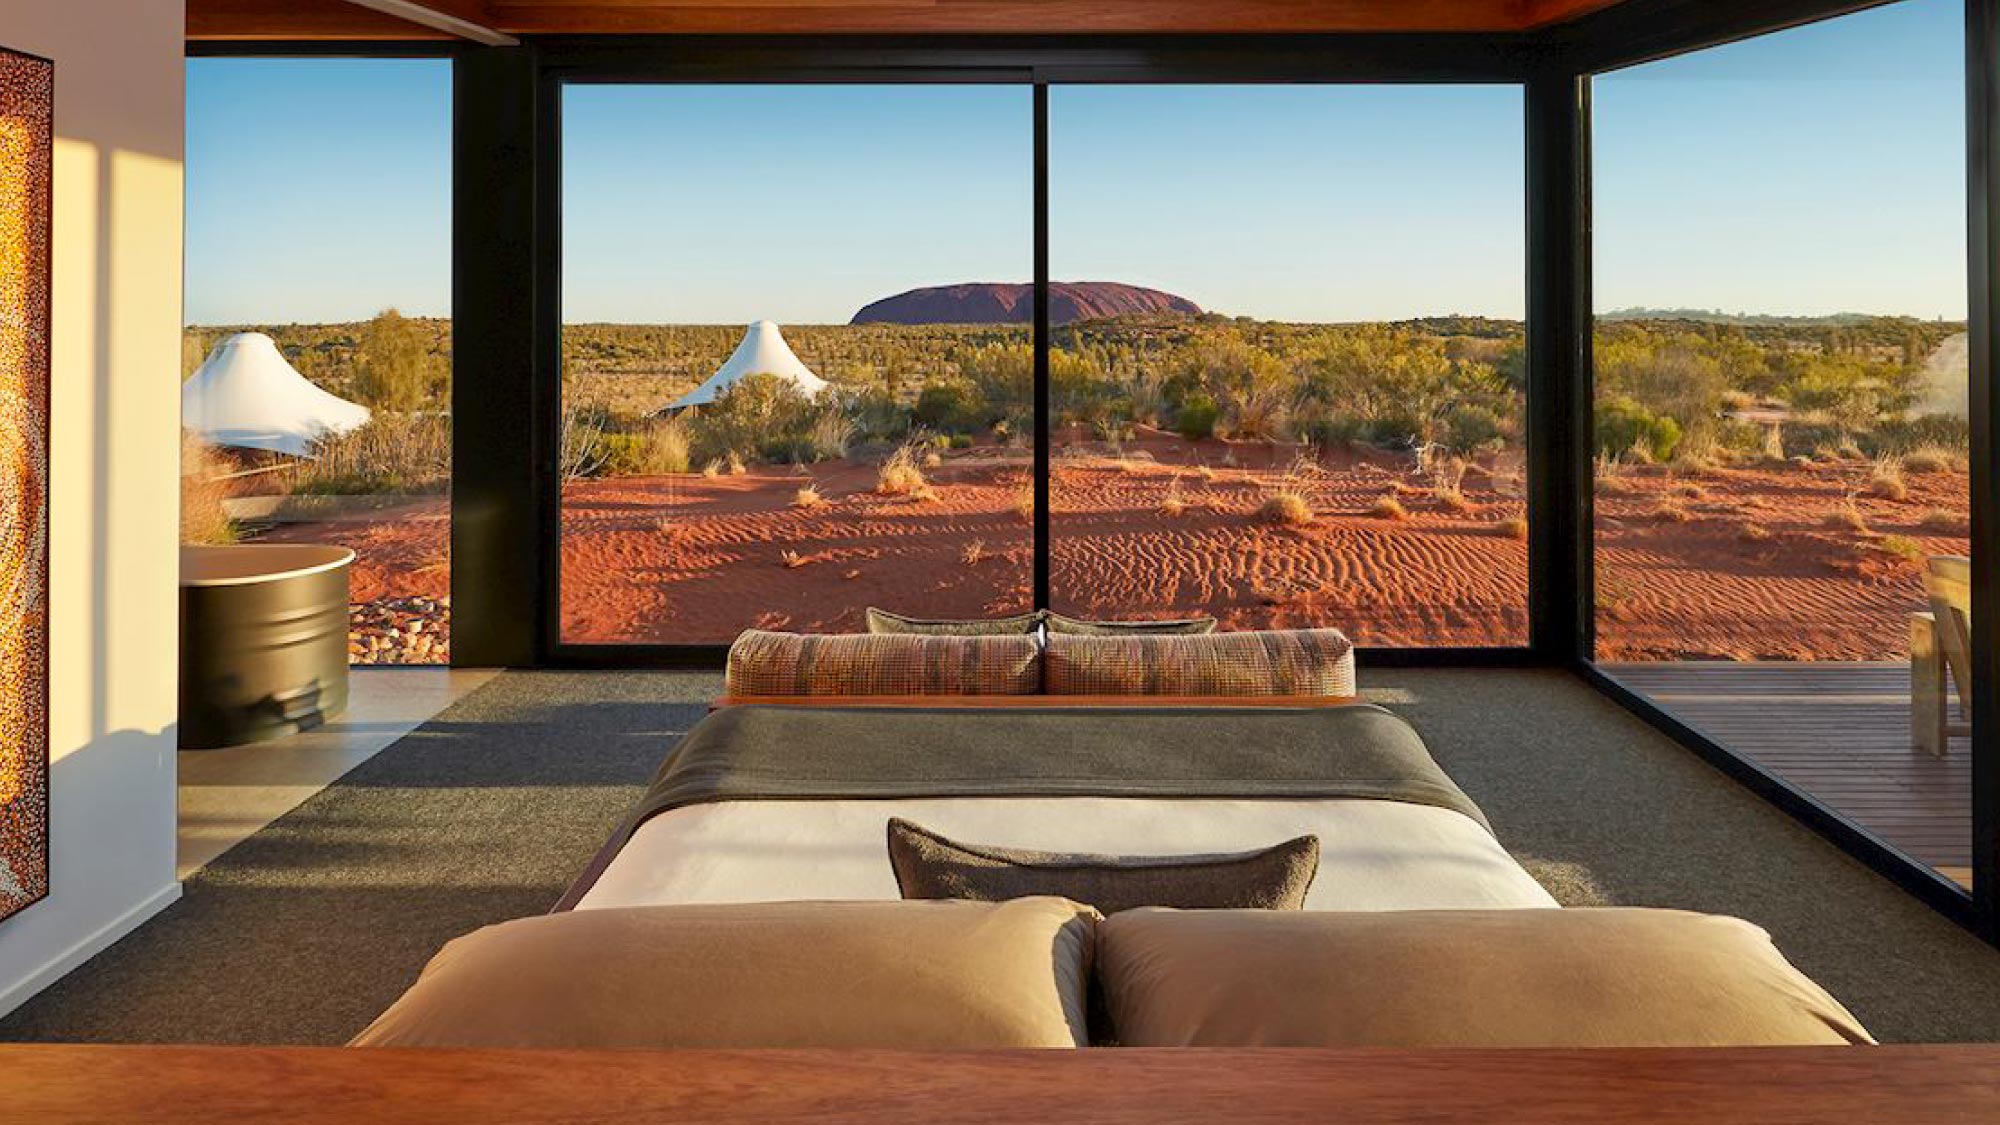 Capture the majestic beauty of Uluru in Australia, a highlight of the journey spanning 21 countries, tailored for self-flying pilots. Experience the spiritual enormity of this iconic landmark, revered by indigenous communities, amidst the breathtaking landscape of Australia's heartland.